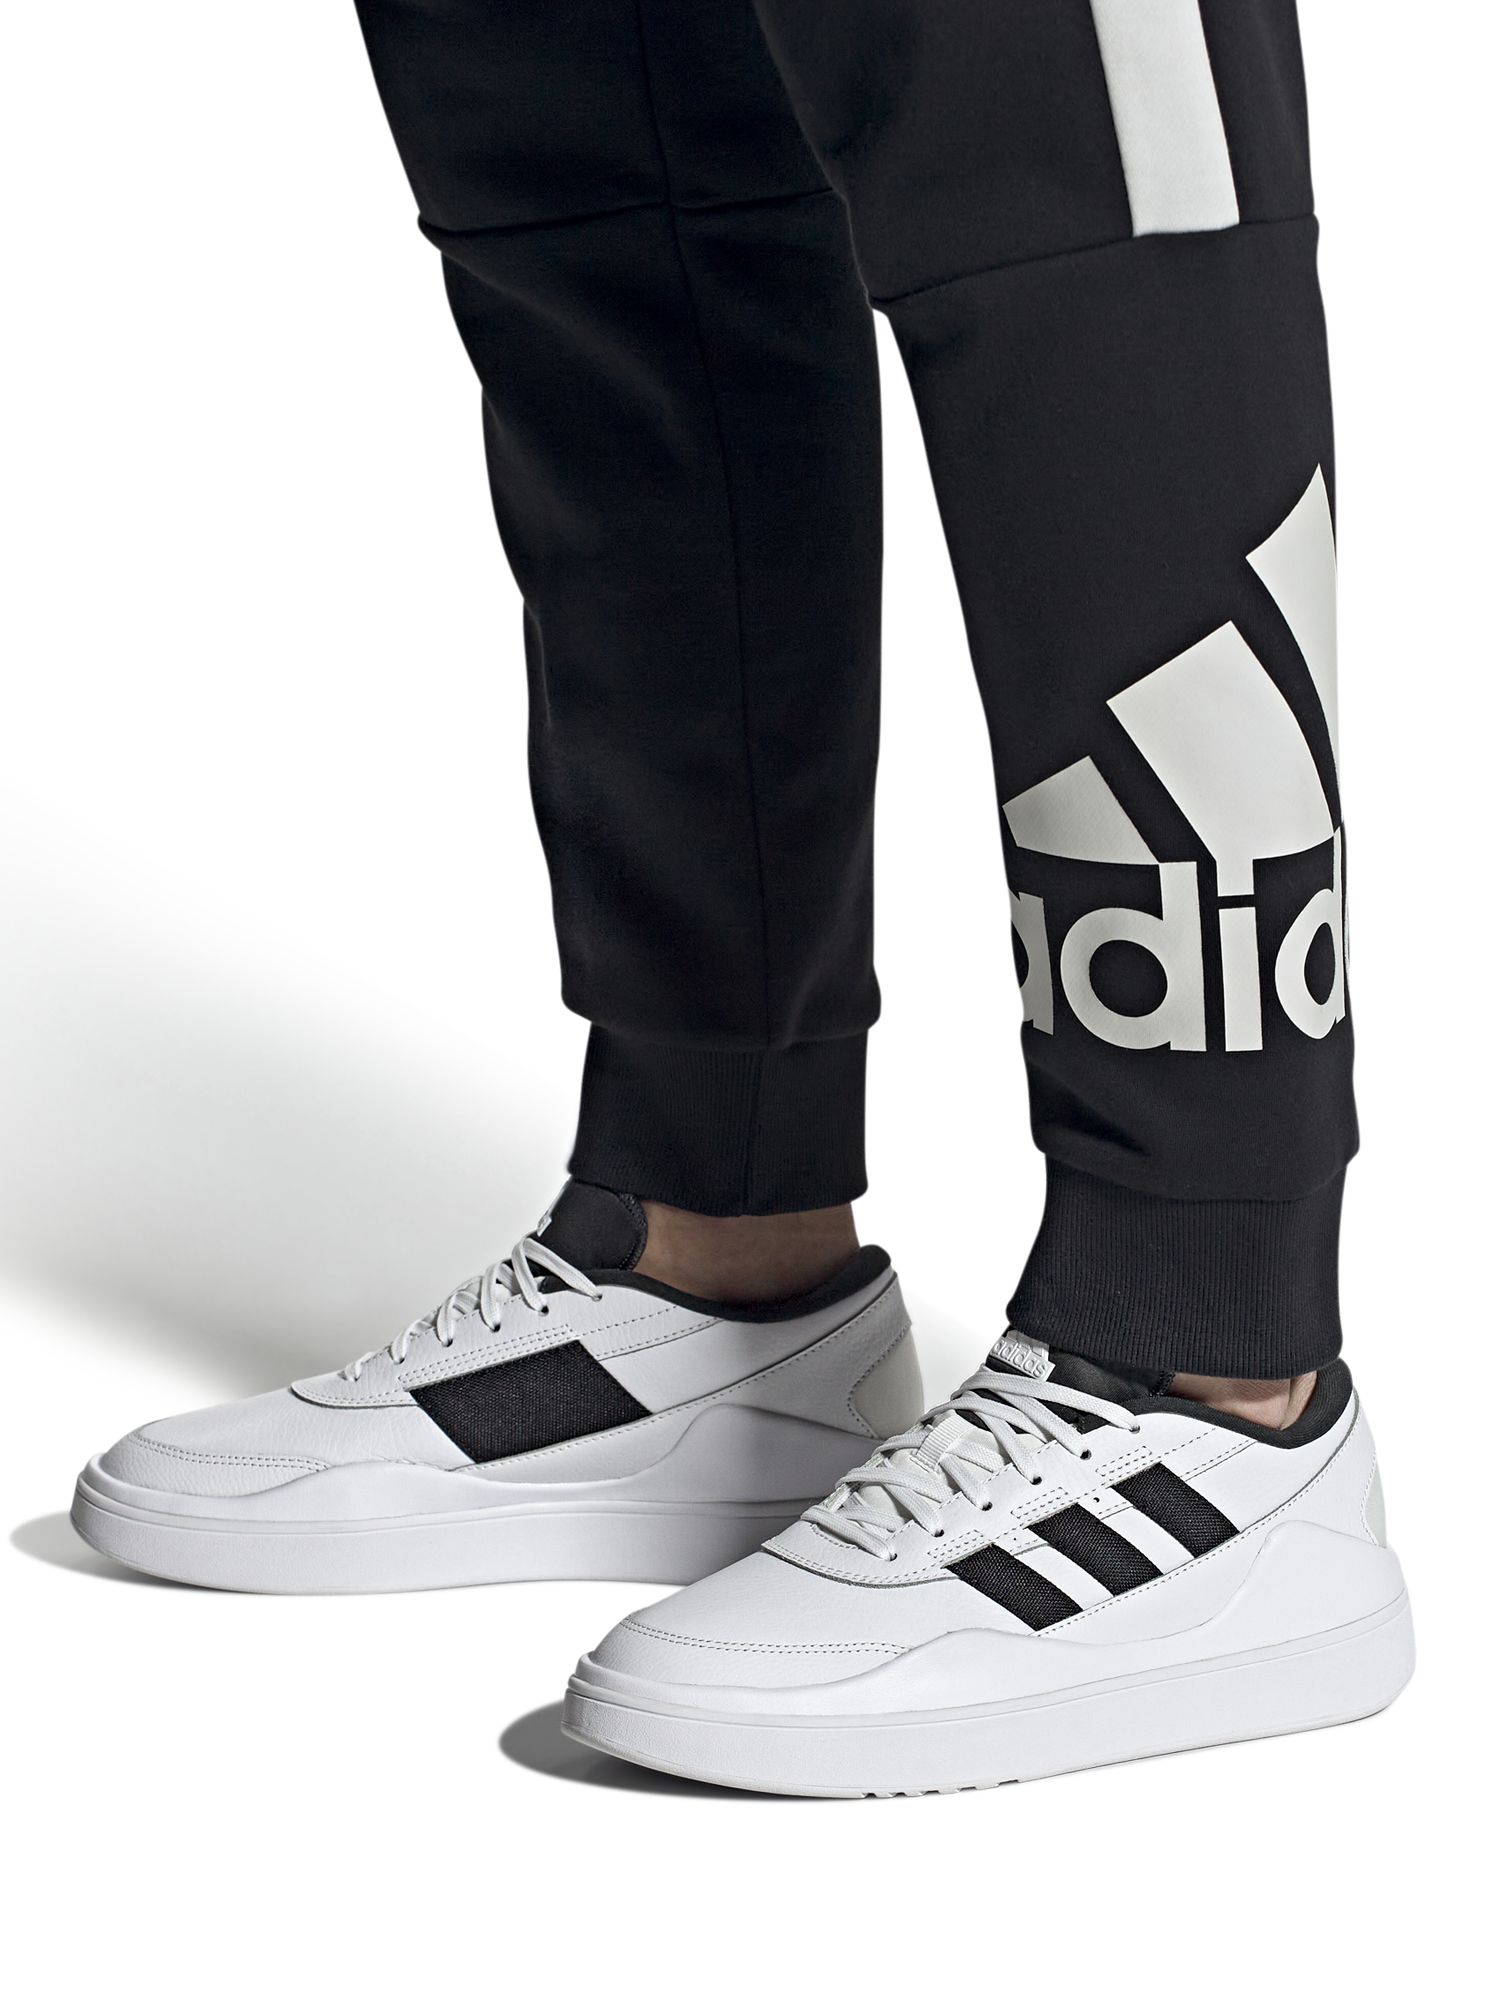 adidas Osade Leather Trainers, White/Black at Lewis & Partners